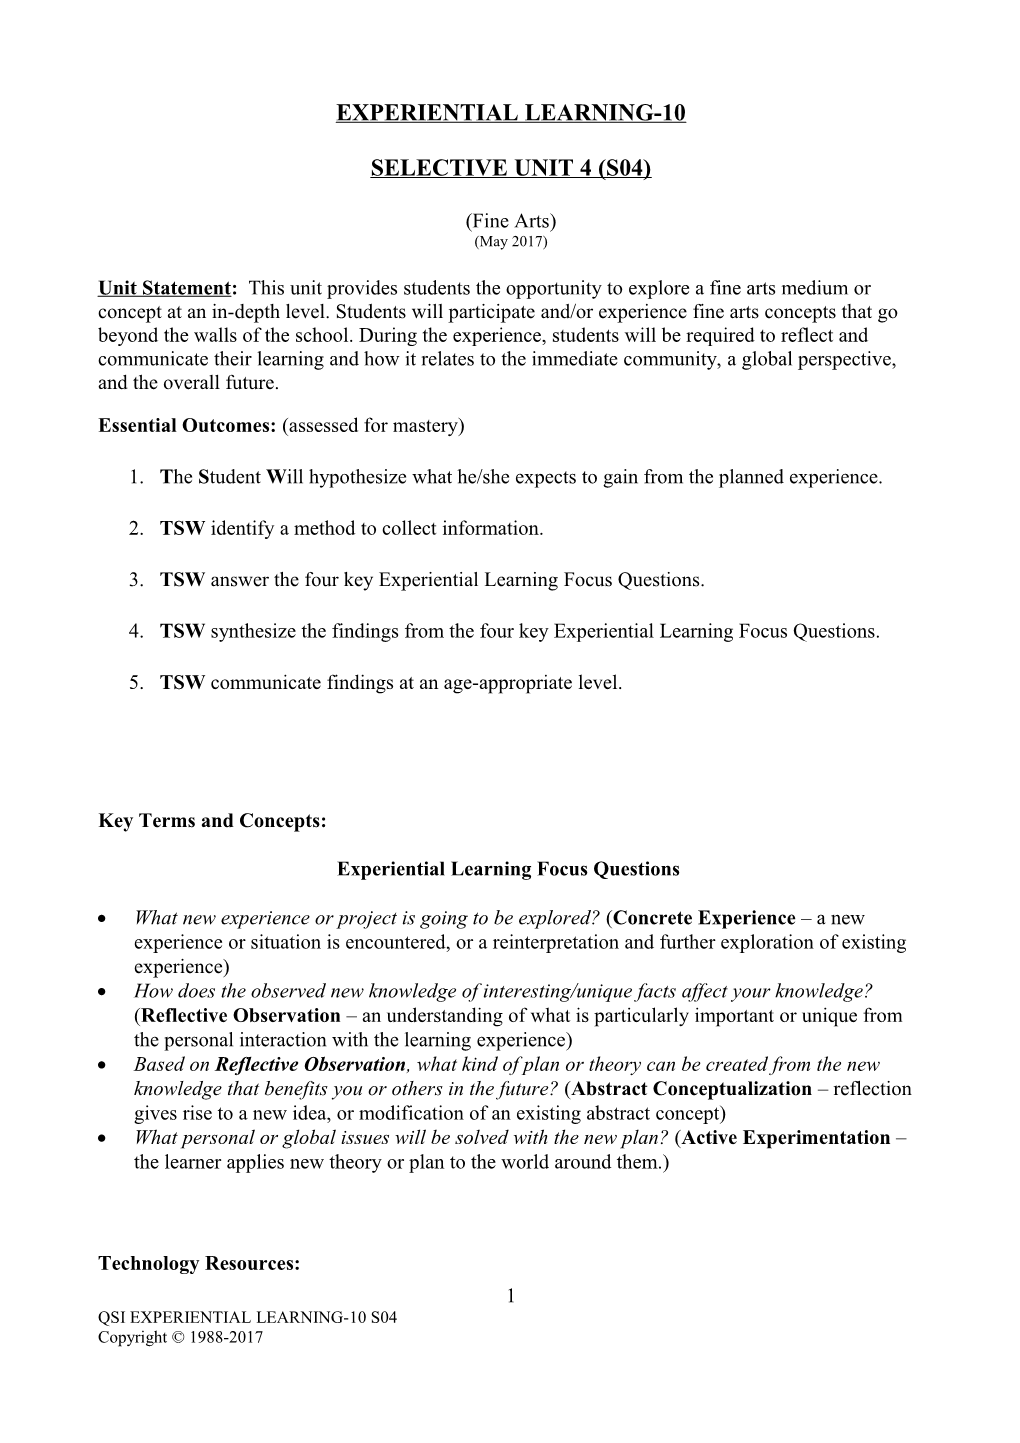 Experiential Learning-10